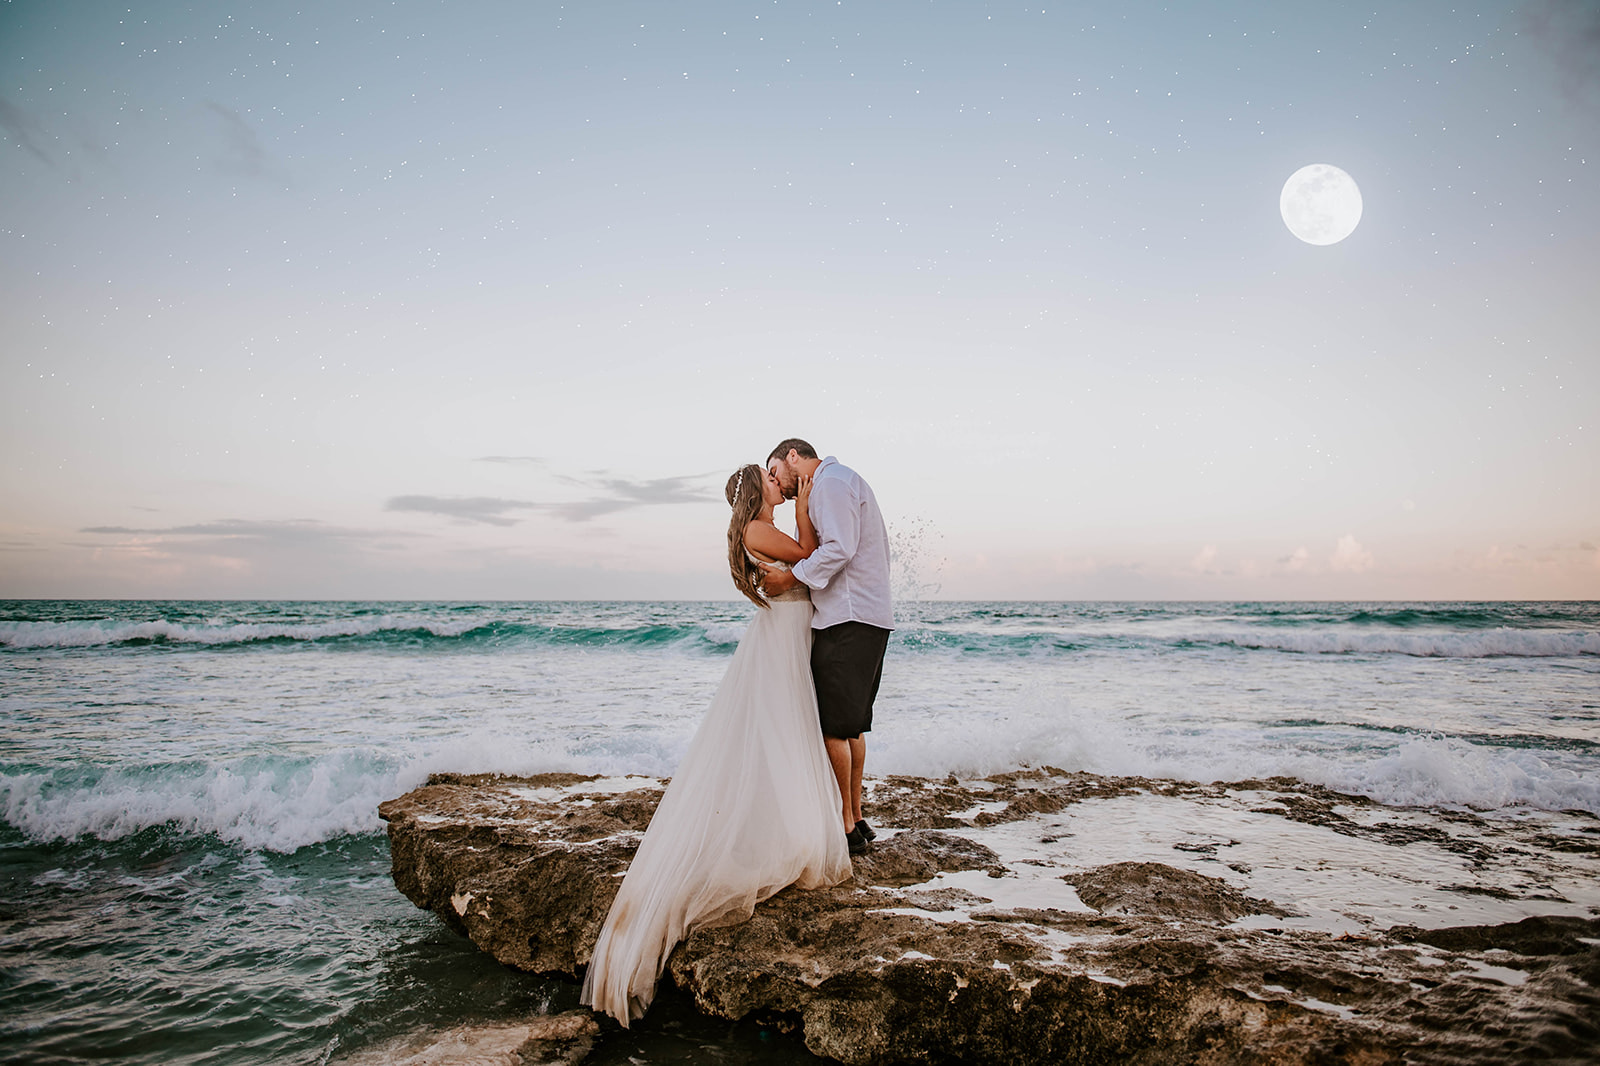  A couple who just got married kissing under the full moon on the island of Isla Mujeres